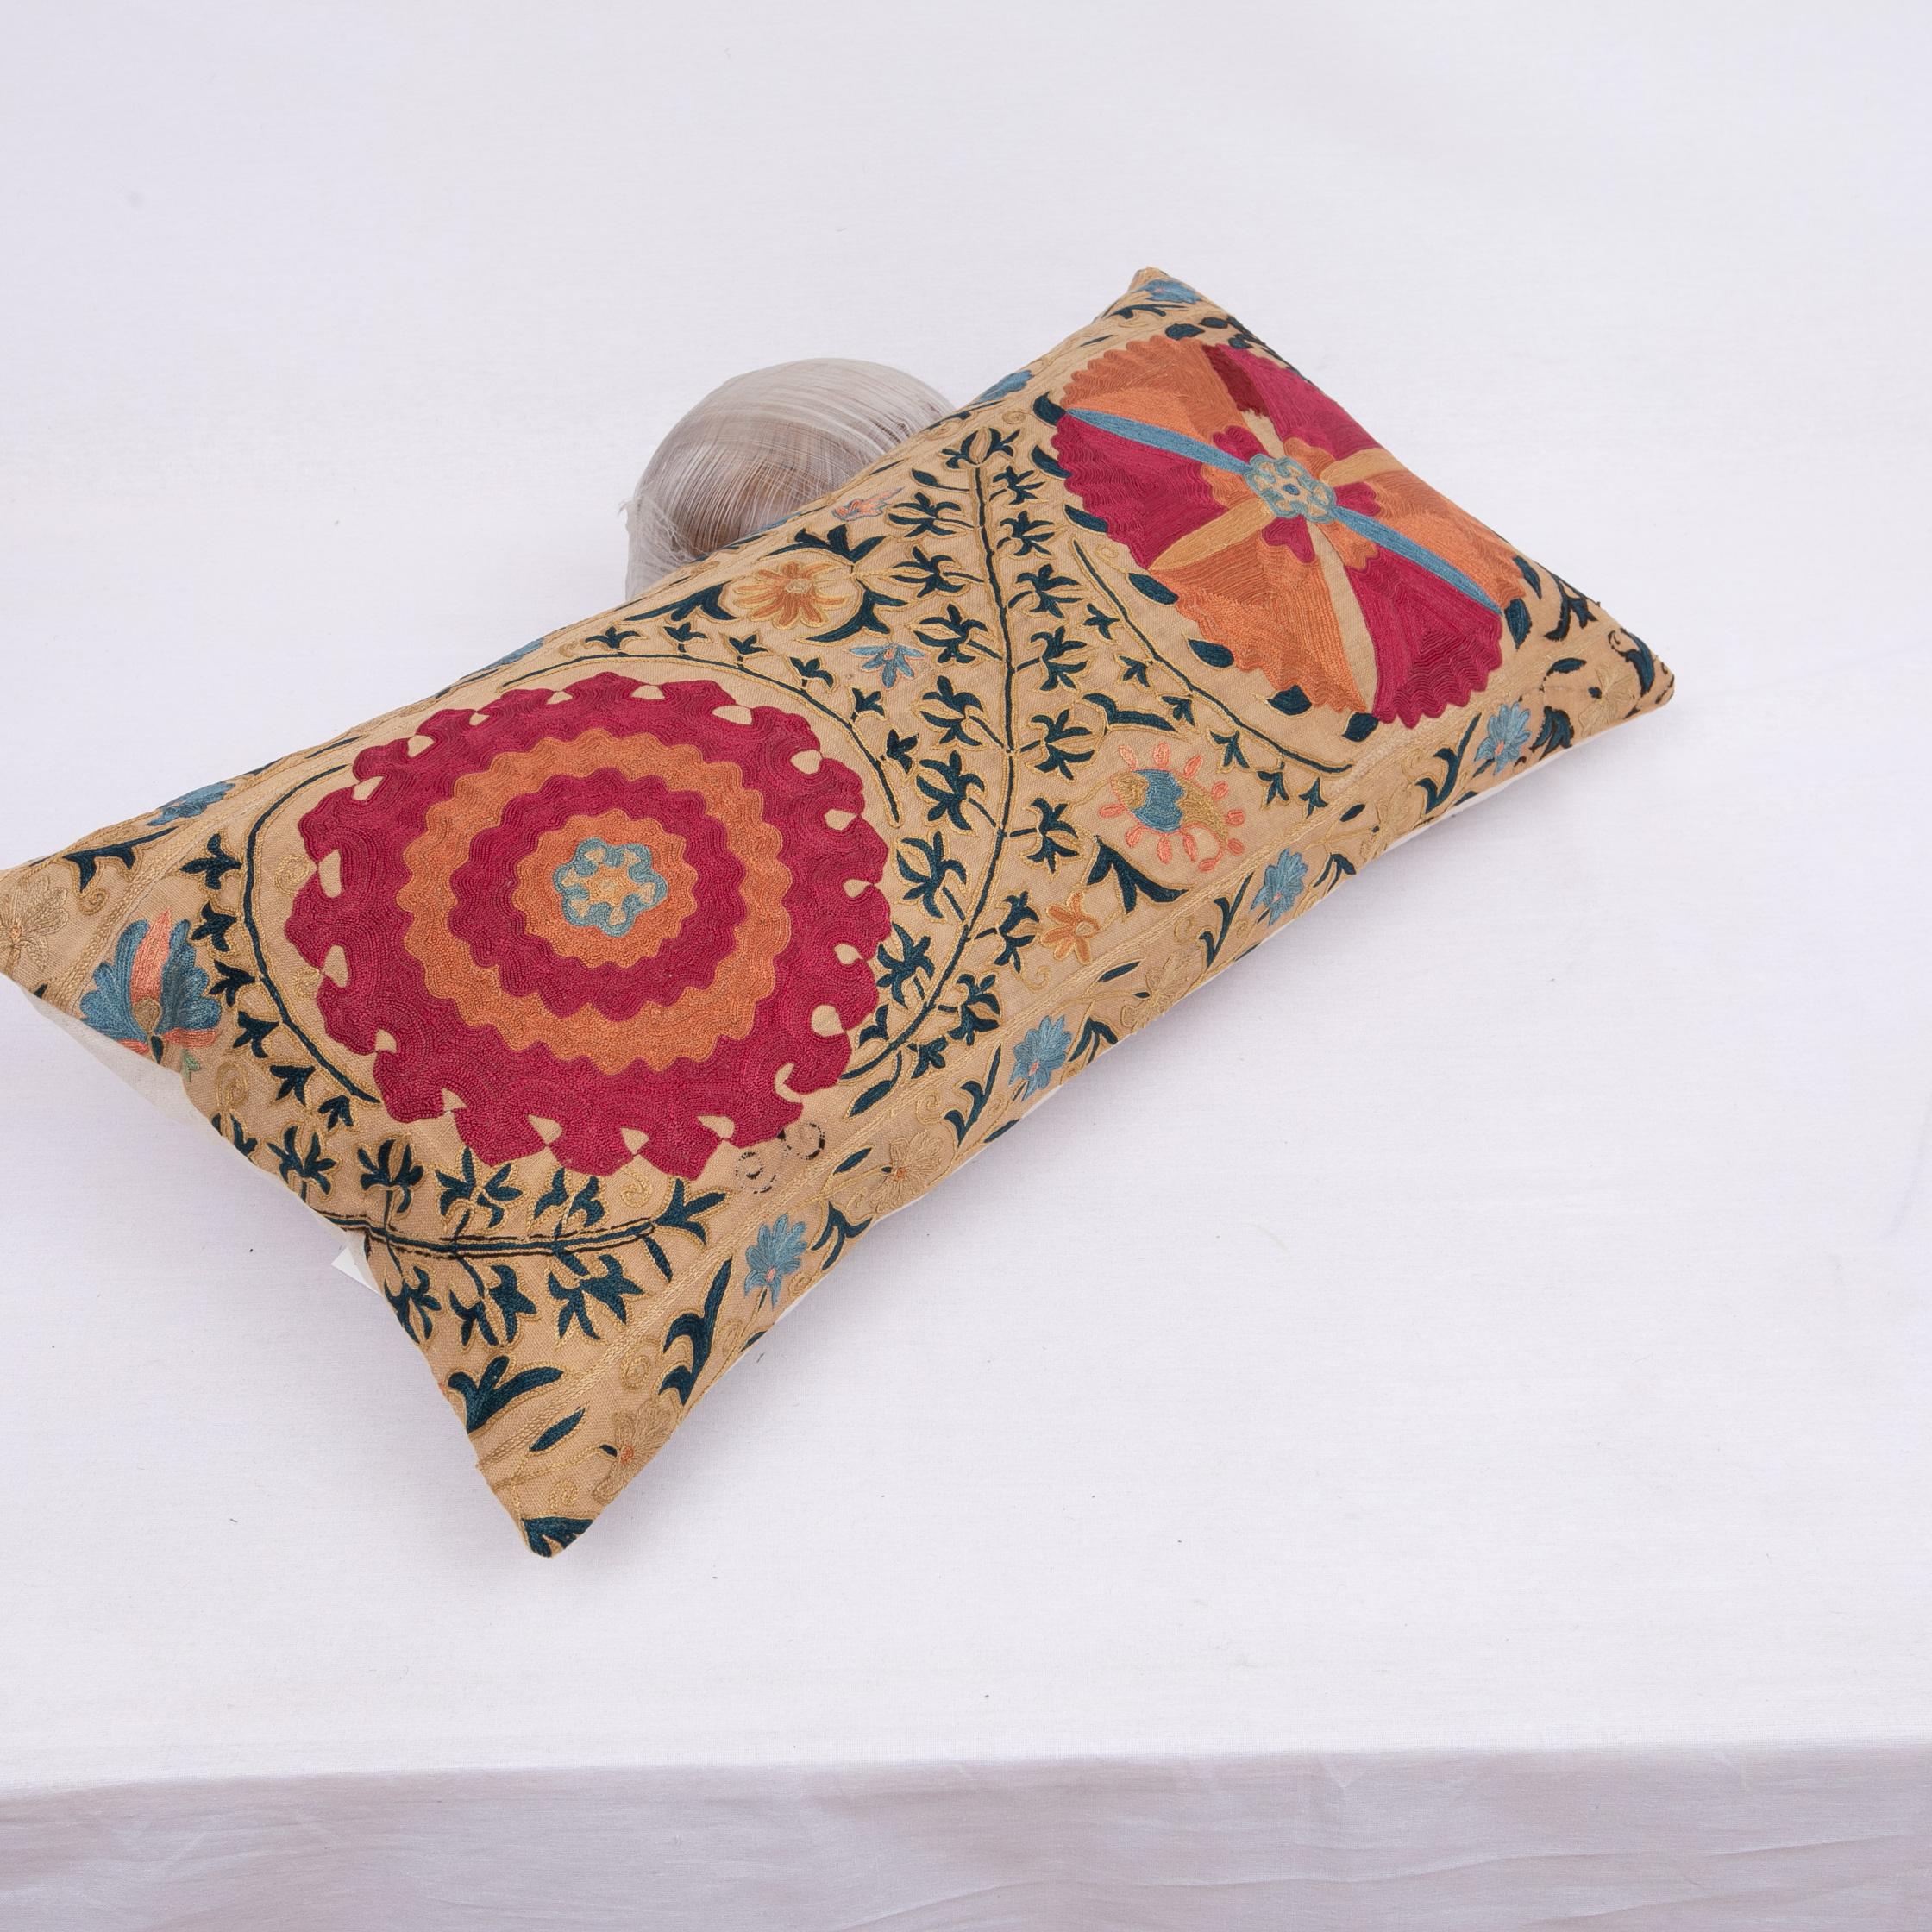 Silk Antique Suzani Pillowcase / Cushion Cover Made from a Mid 19th c Suzani